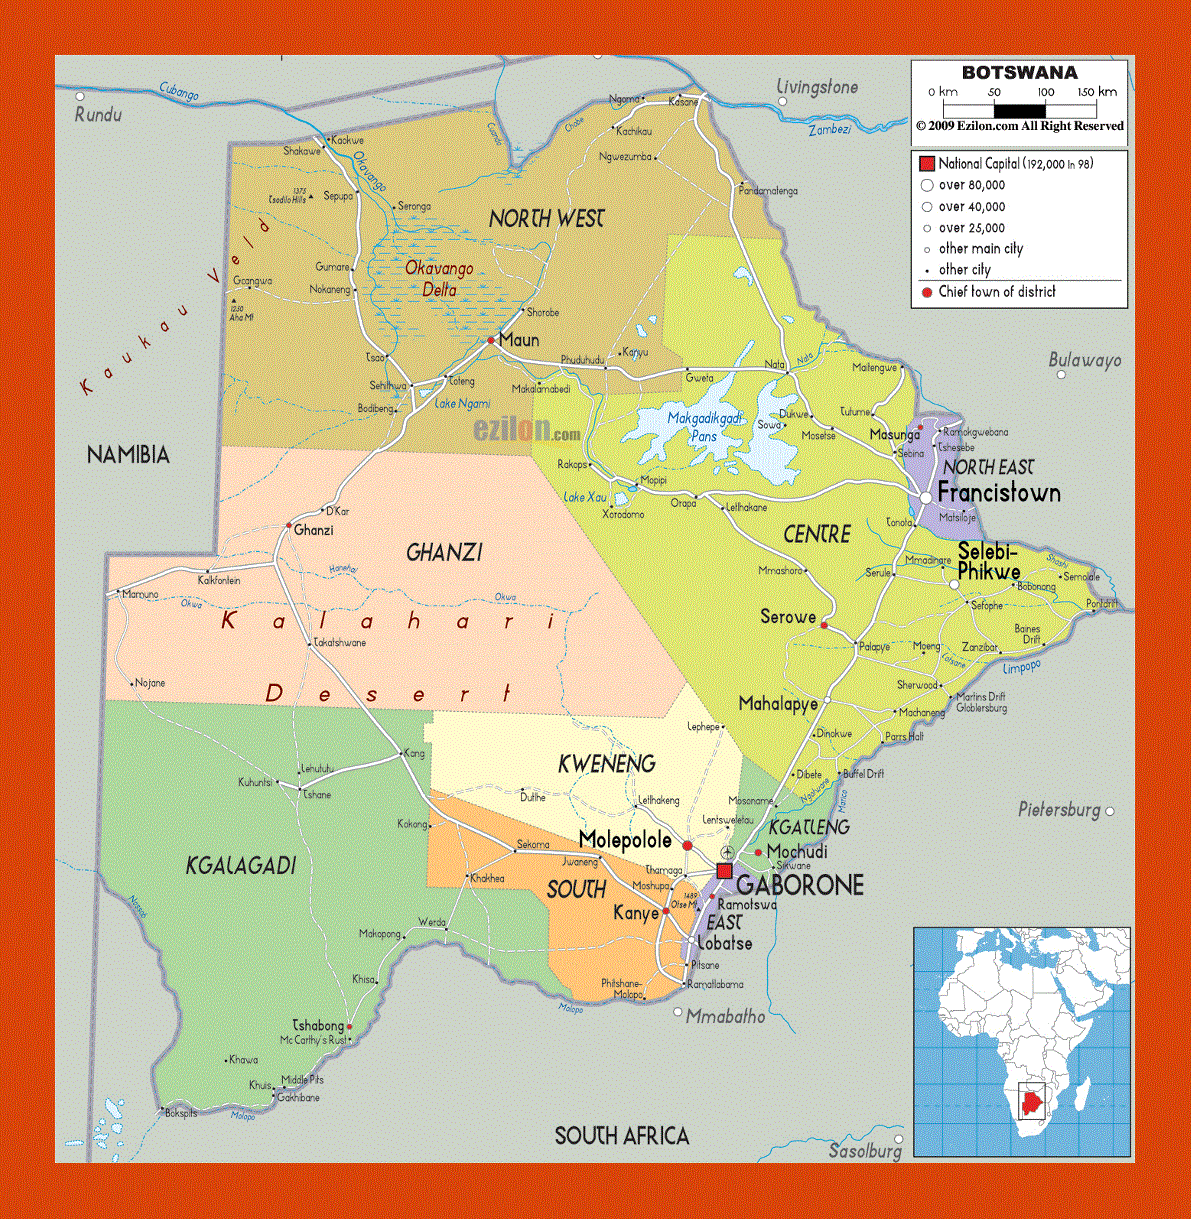 Political and administrative map of Botswana